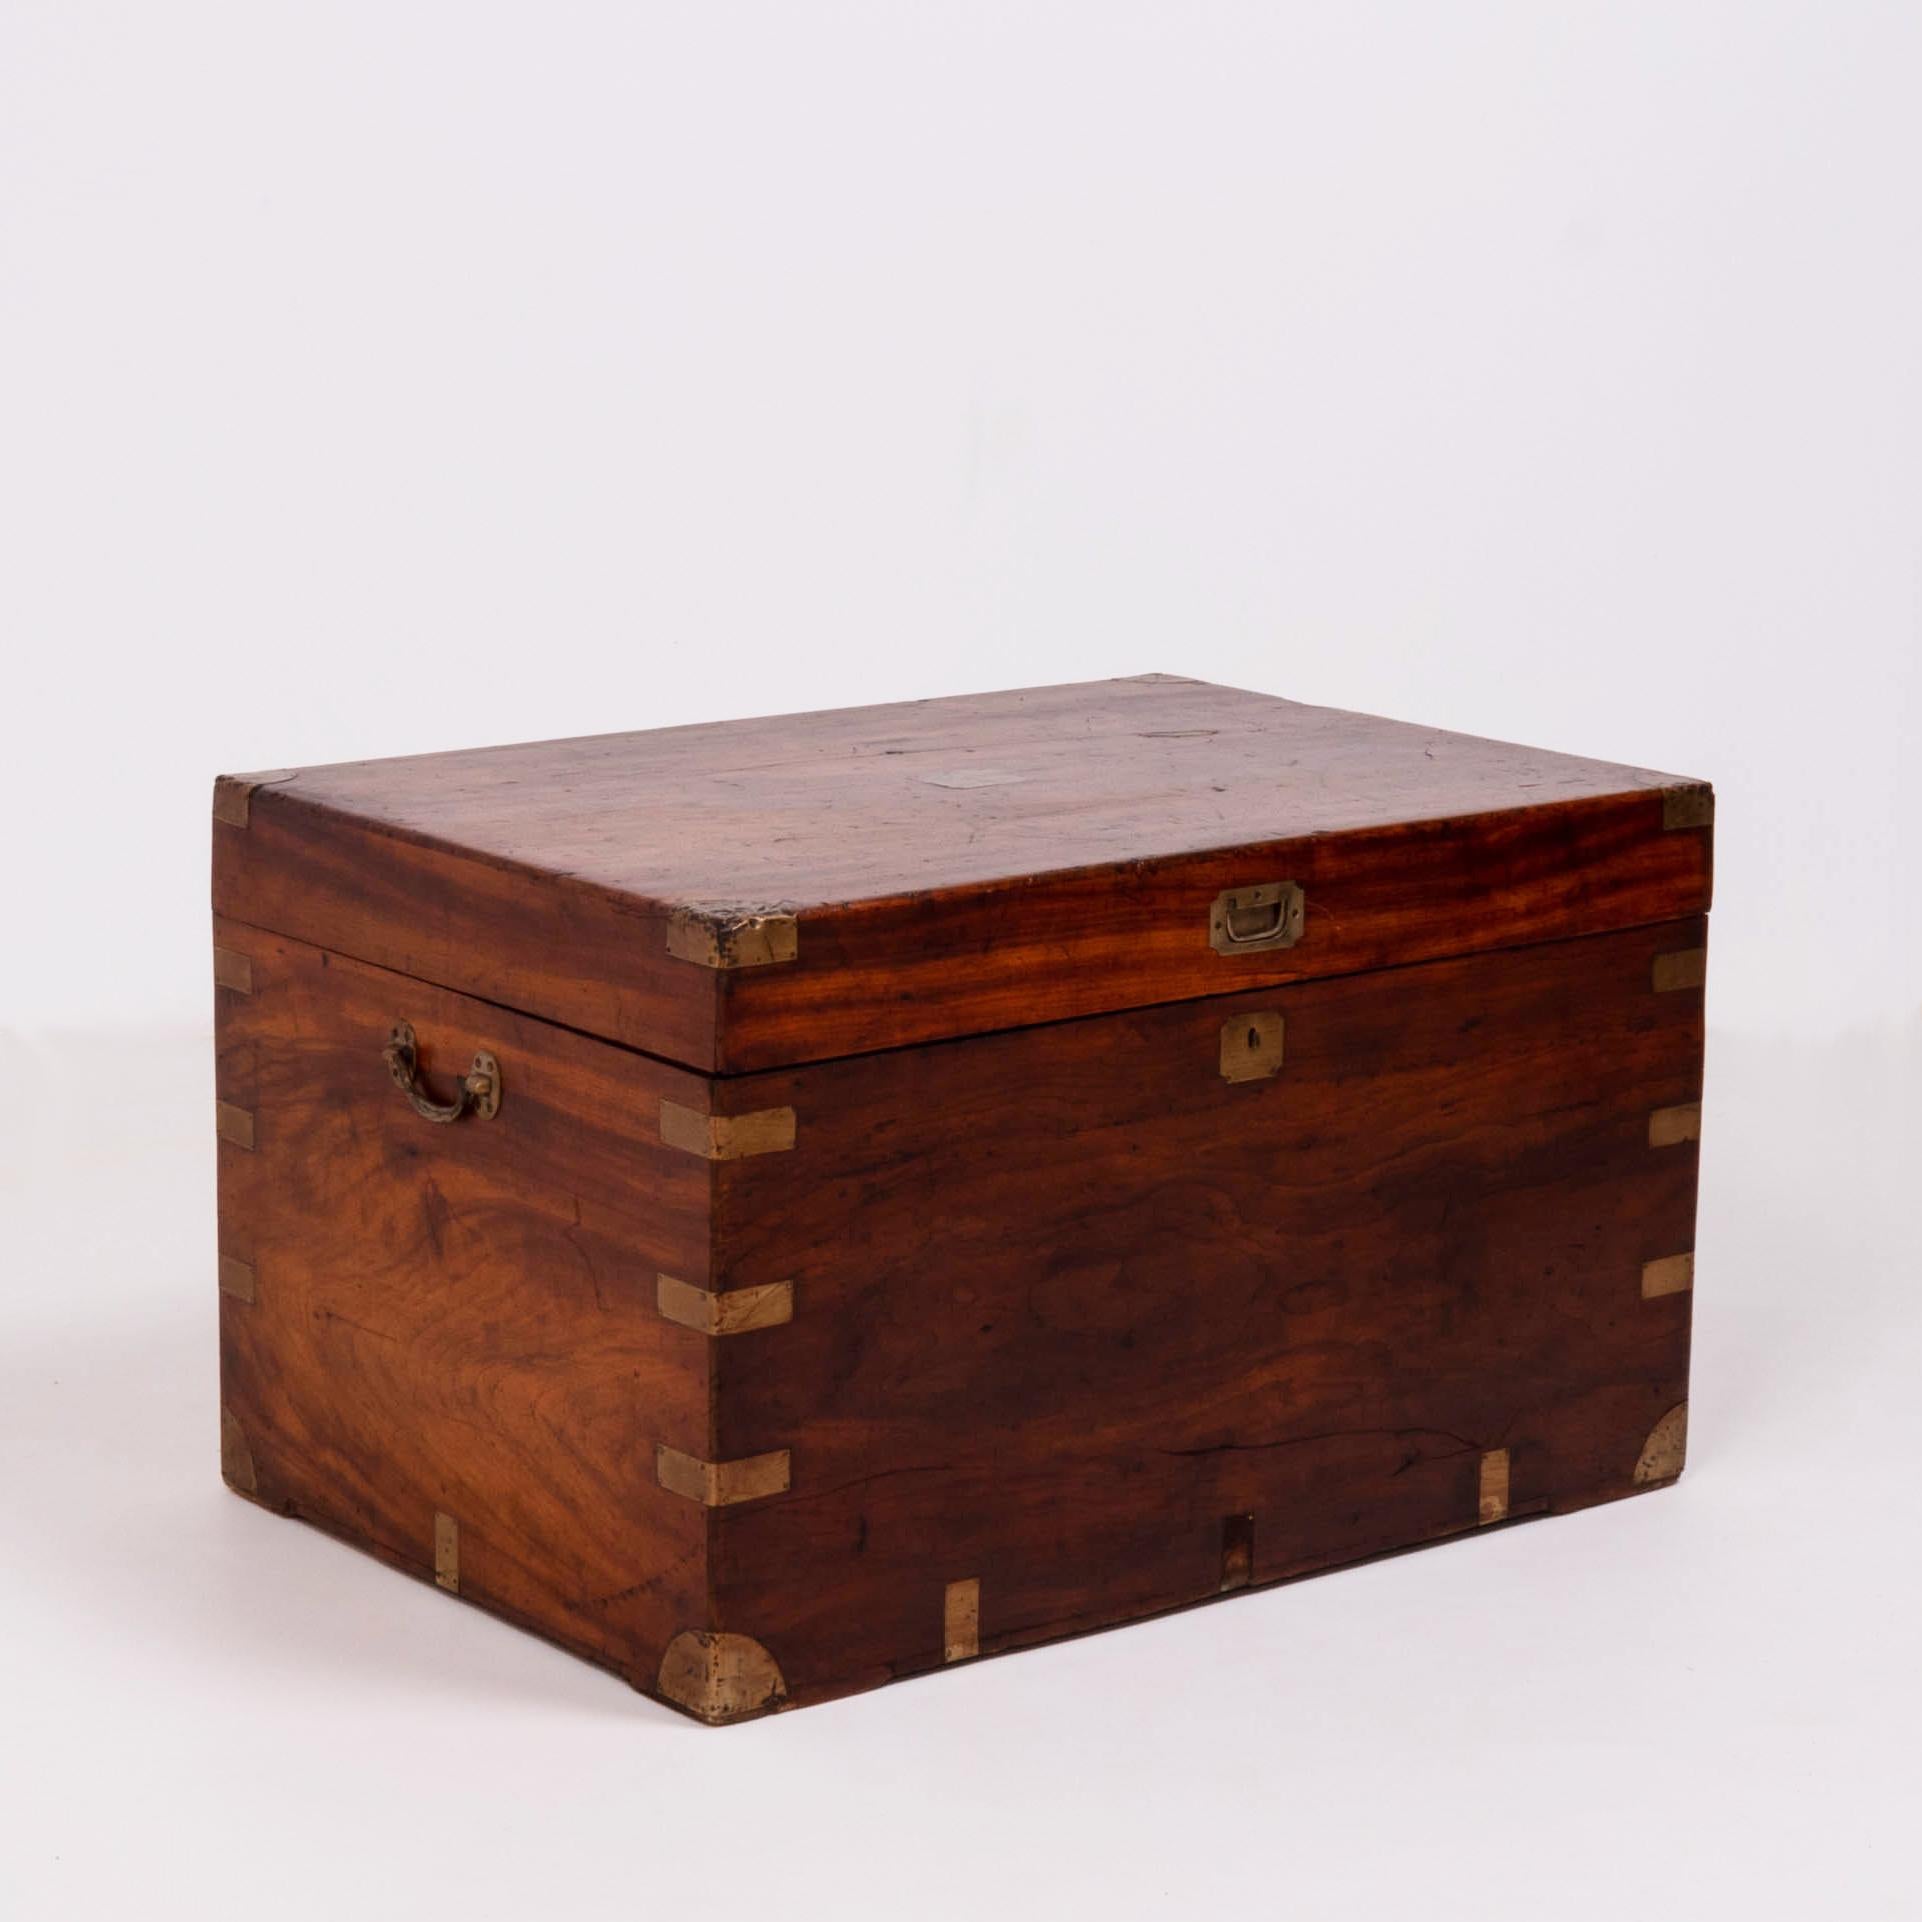 Crafted in the late 19th century by carpenter and cabinet makers AH FOO, this large chest is a beautiful example of craftsmanship.

Constructed from sturdy camphor wood, the chest has a hinged lid with a brass pull and two additional brass handles